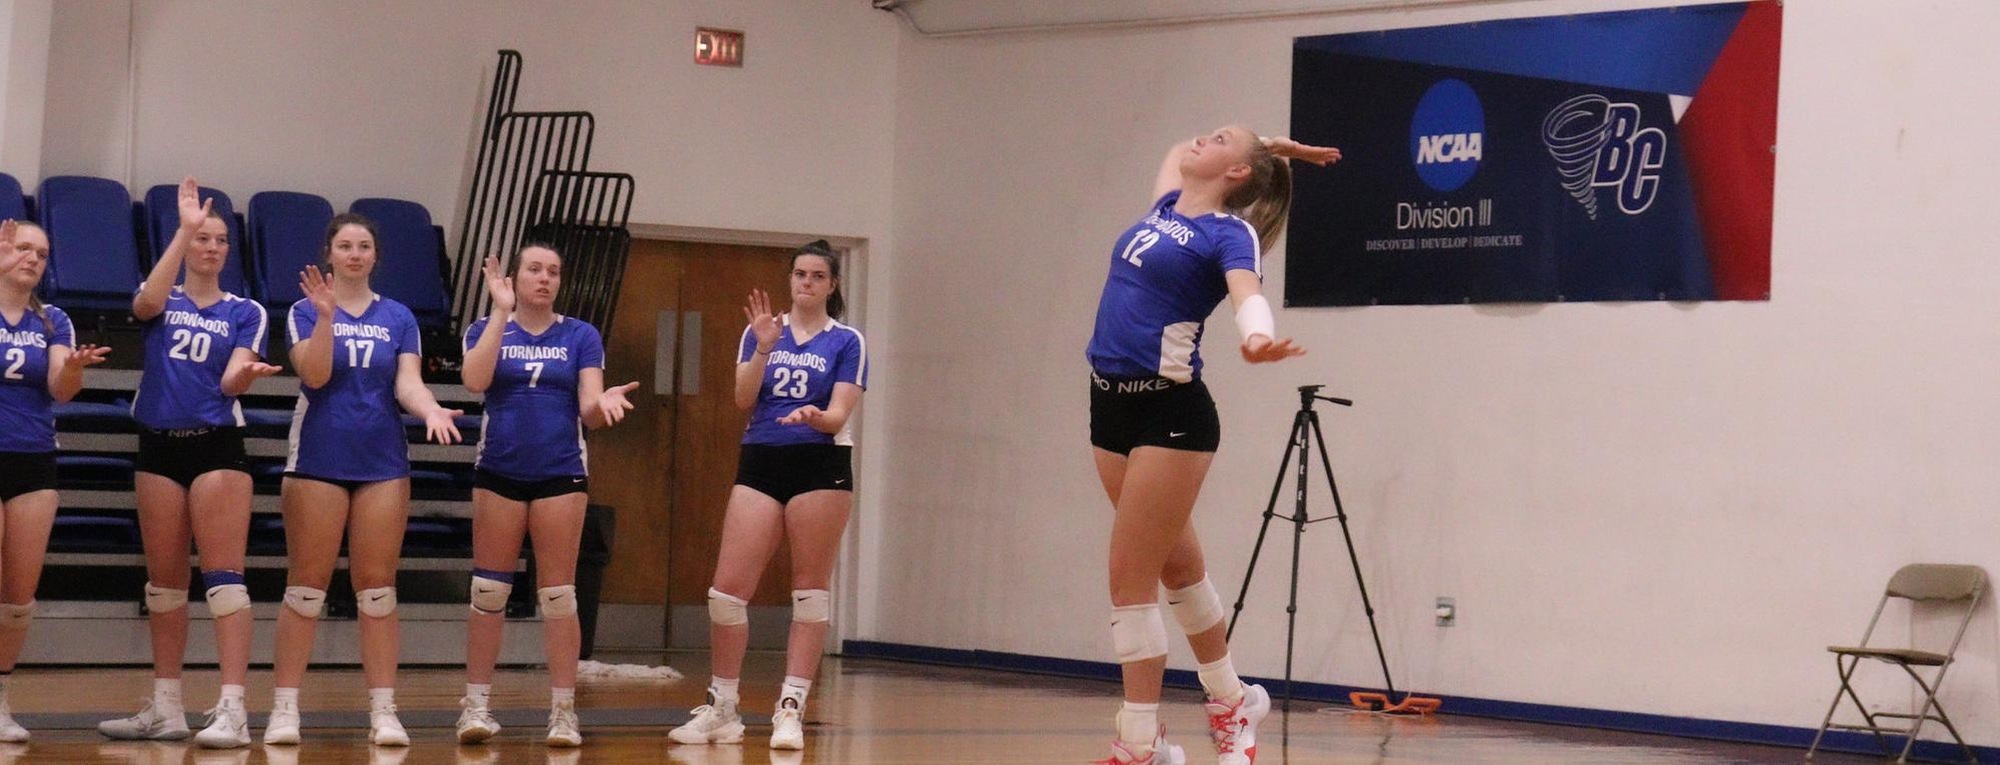 Tornados Win Thrilling 5-Setter at Pfeiffer for First Conference Win